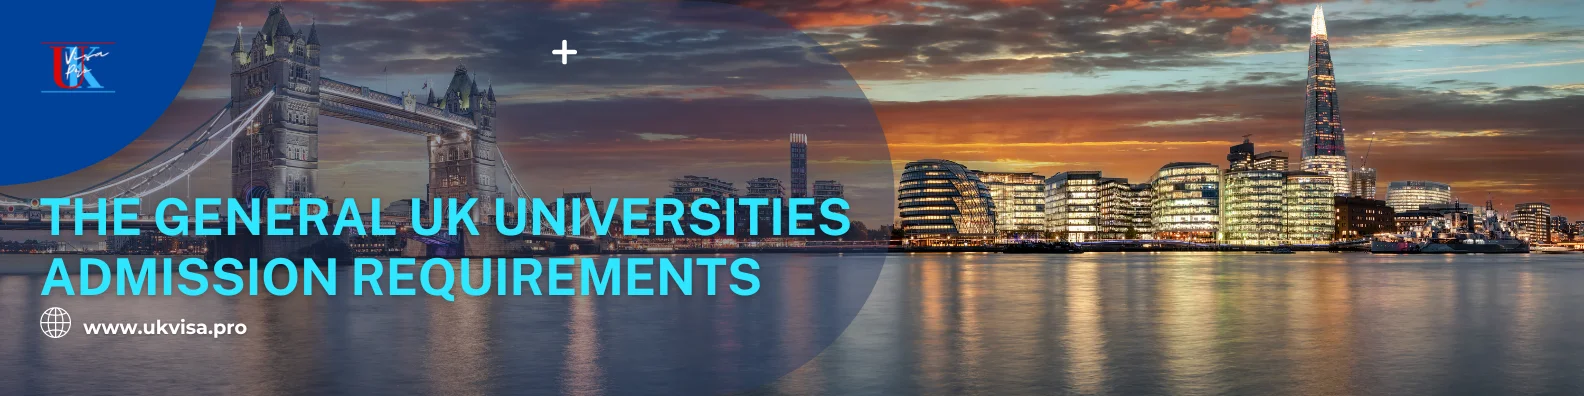 Study in the UK - The General UK Universities Admission Requirements